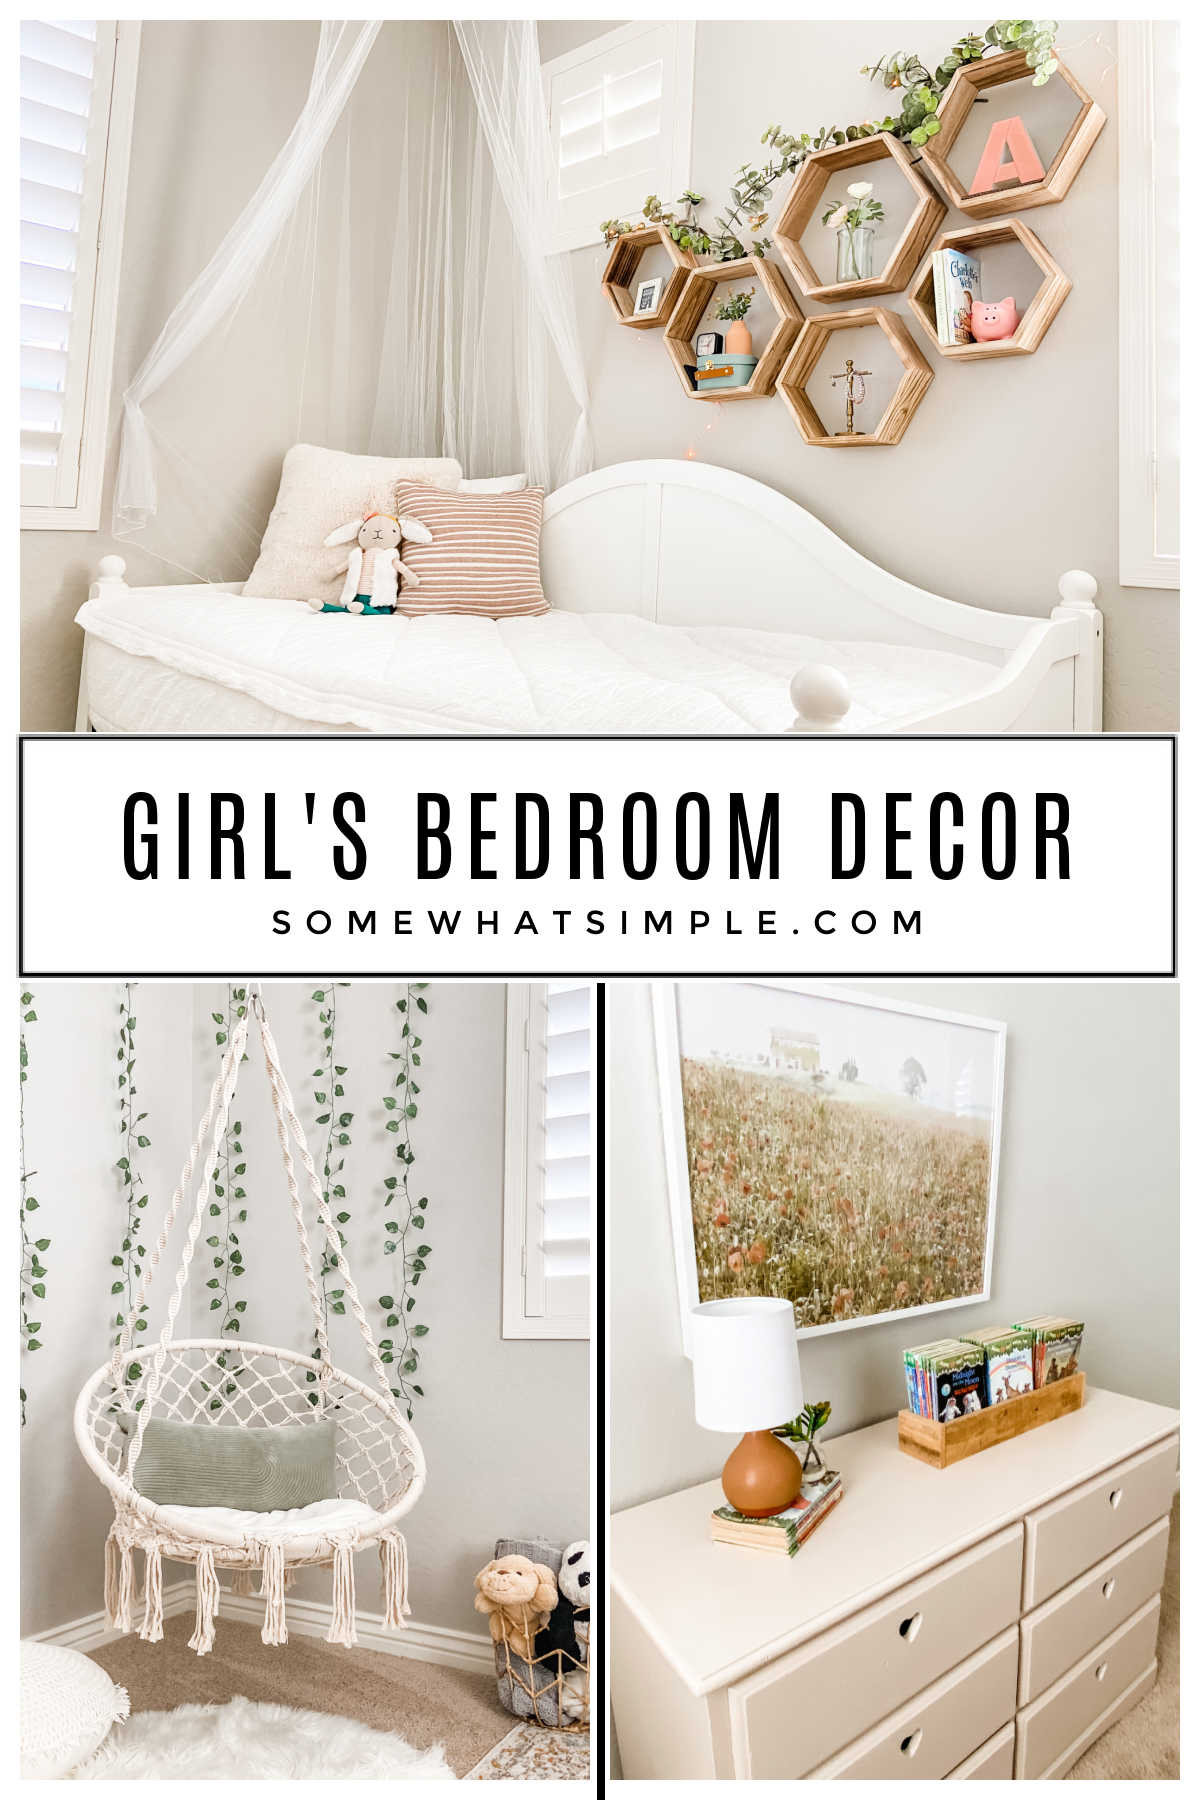 Easy Girls Bedroom Decor on a Budget - Somewhat Simple